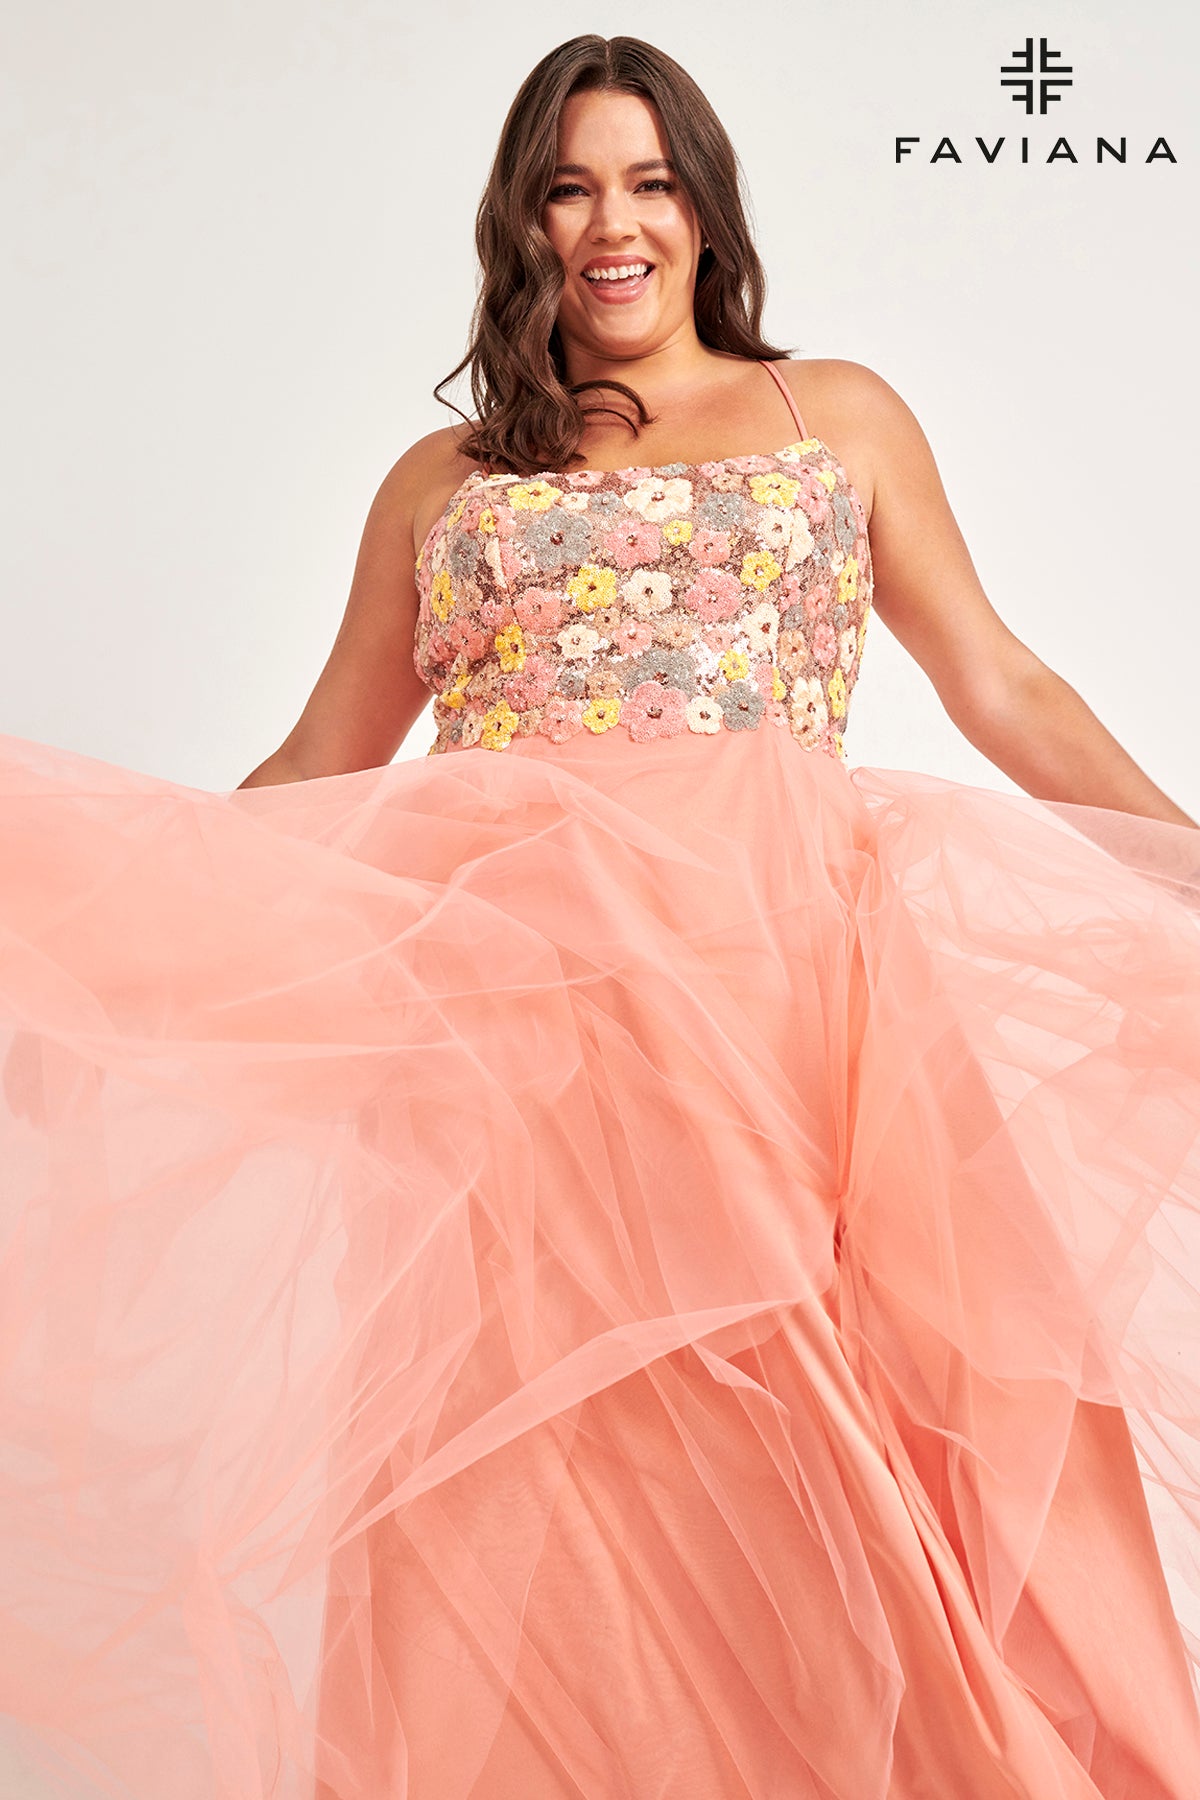 Curvy Size Floral Sequin Flowy Tulle Gown